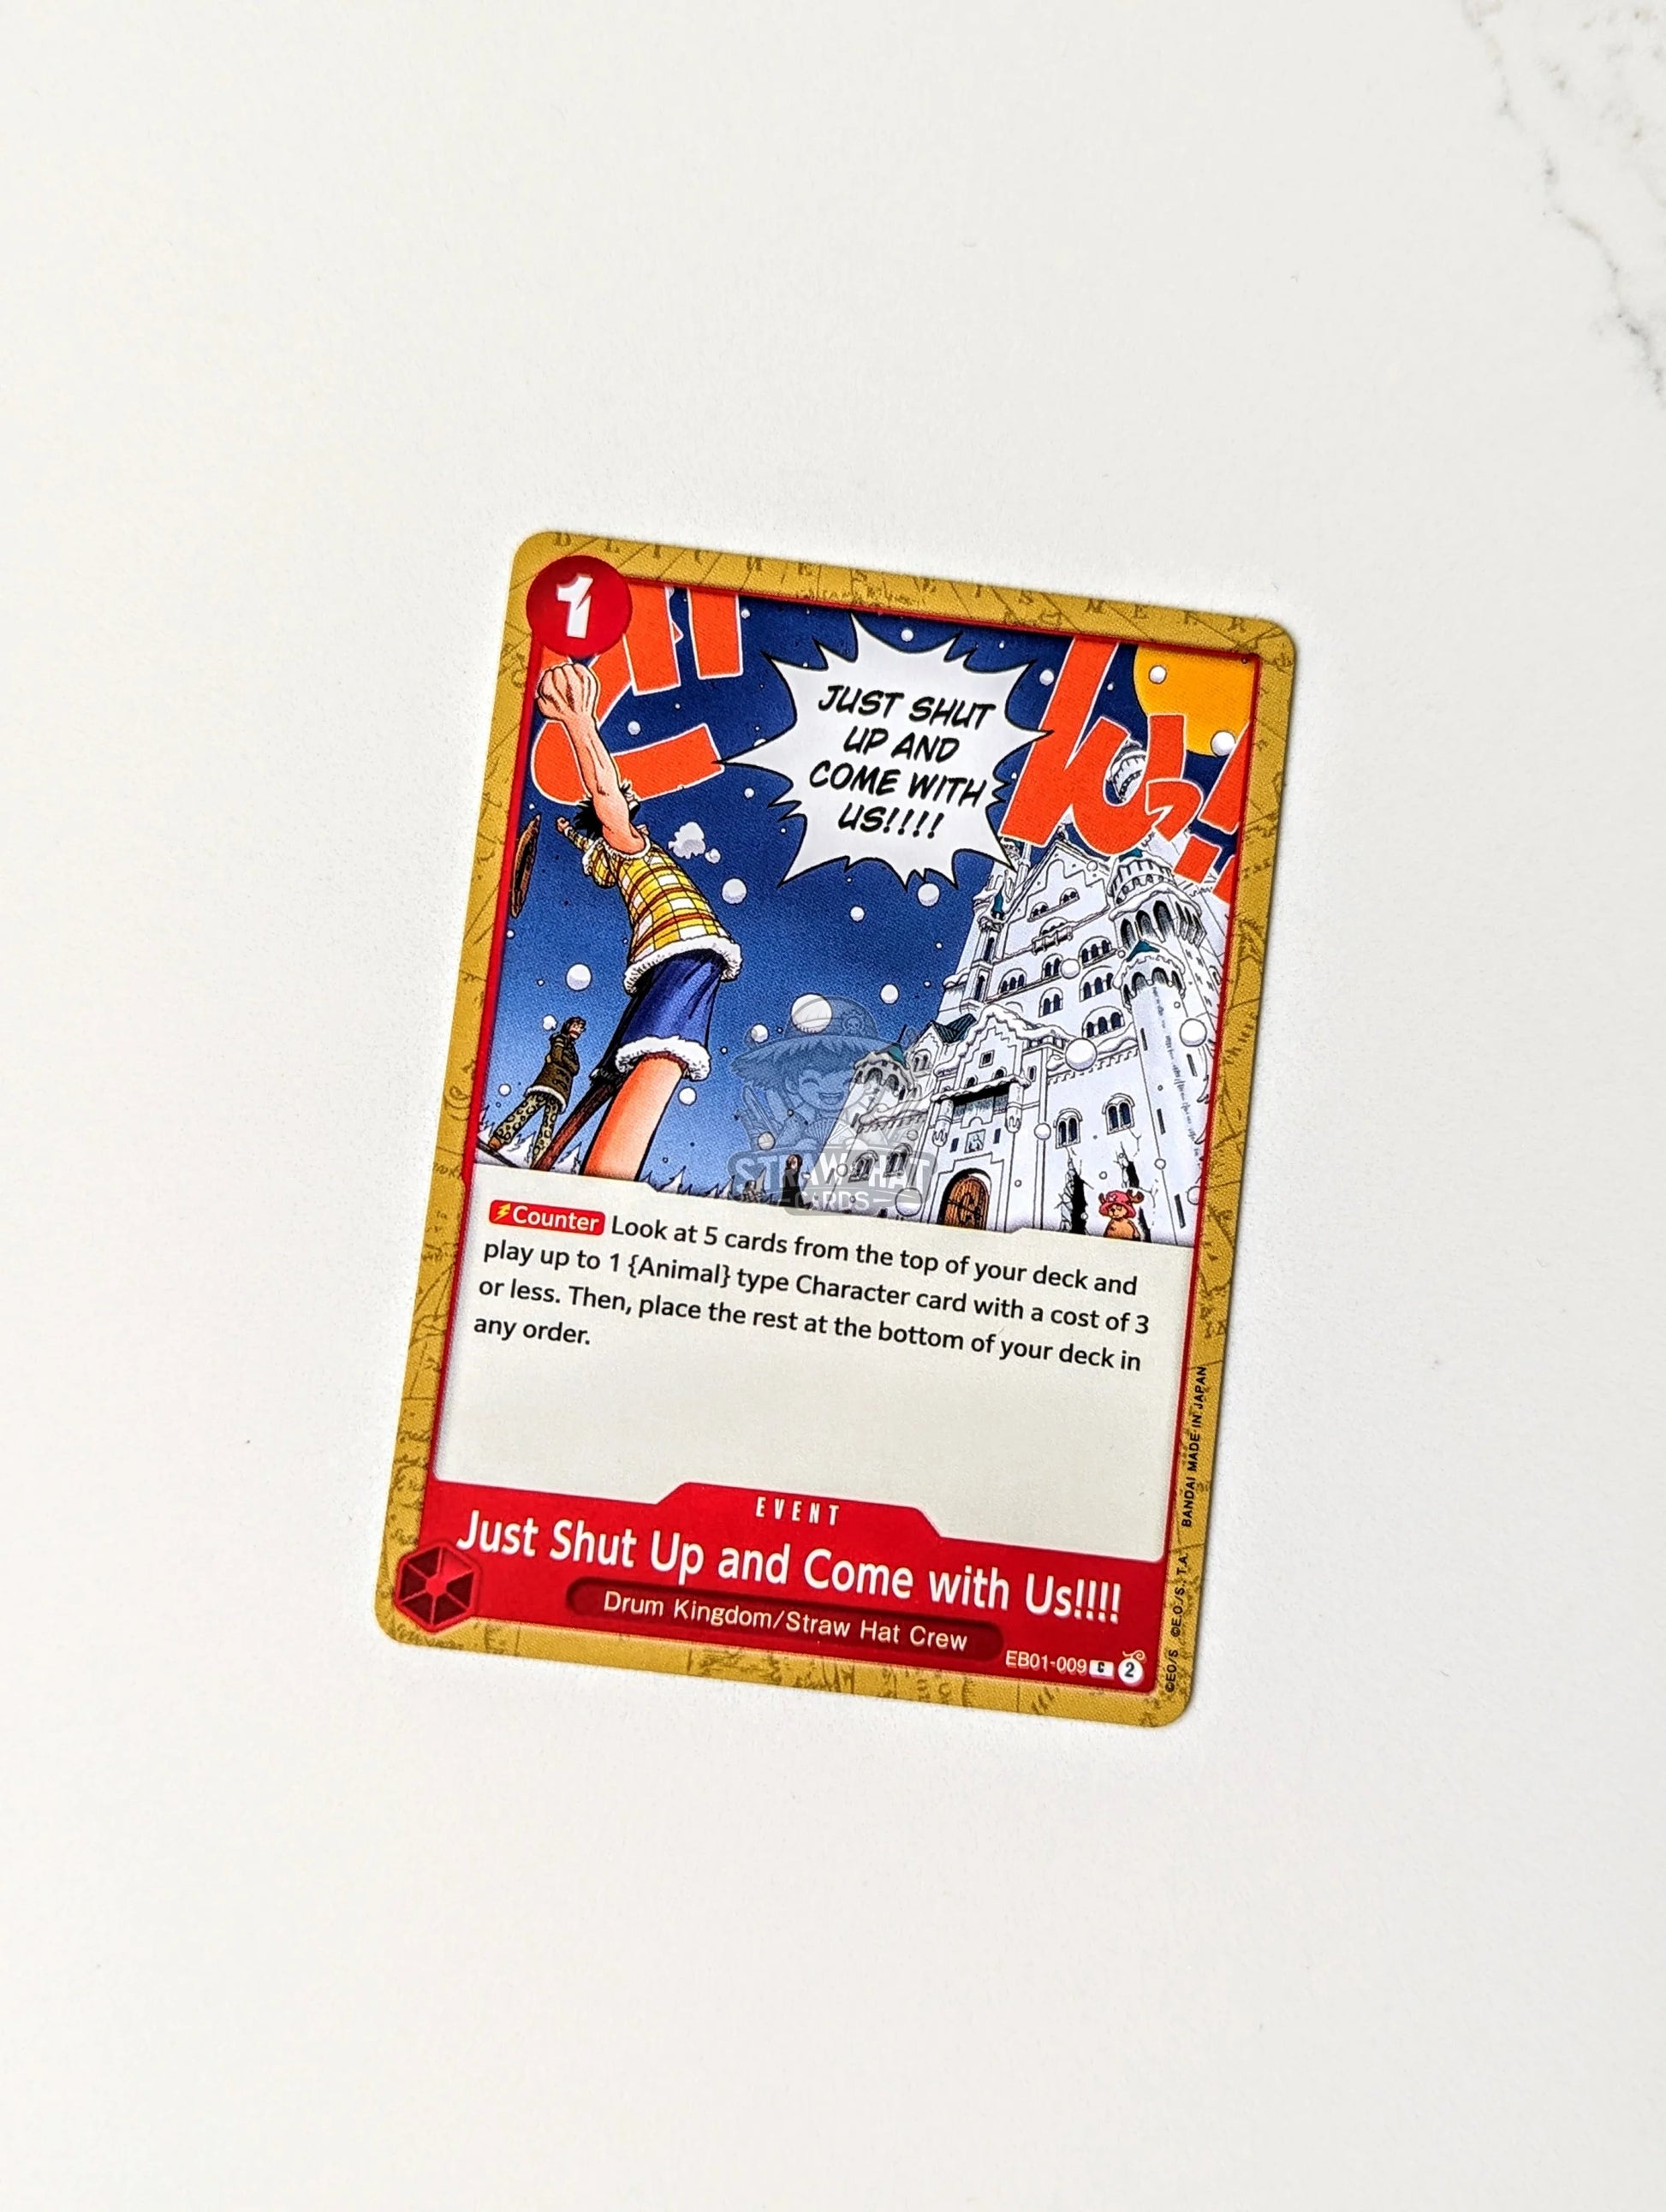 One Piece Eb01 Memorial Collection Just Shut Up And Come With Us!!!! Eb01-009 C Card [Eng